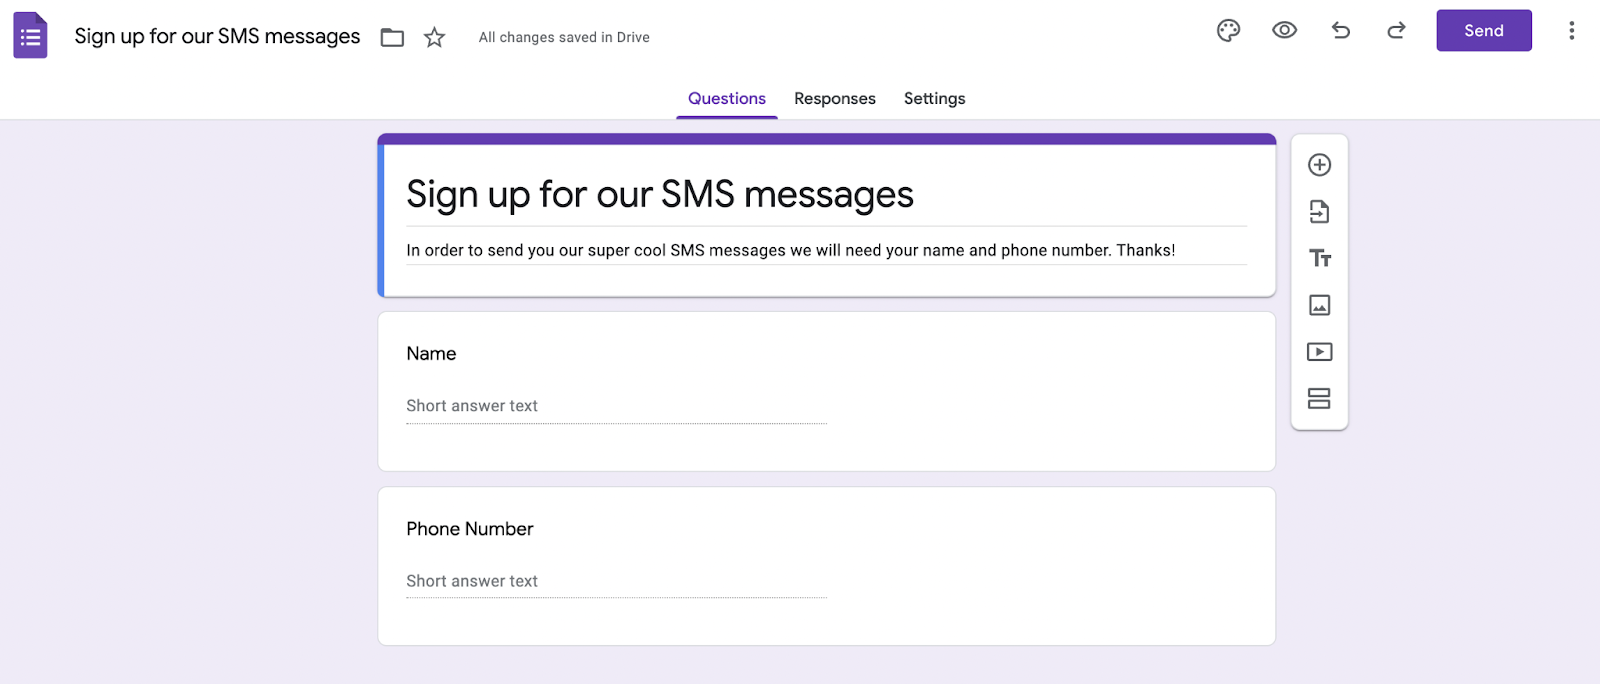 Google form with SMS message signup